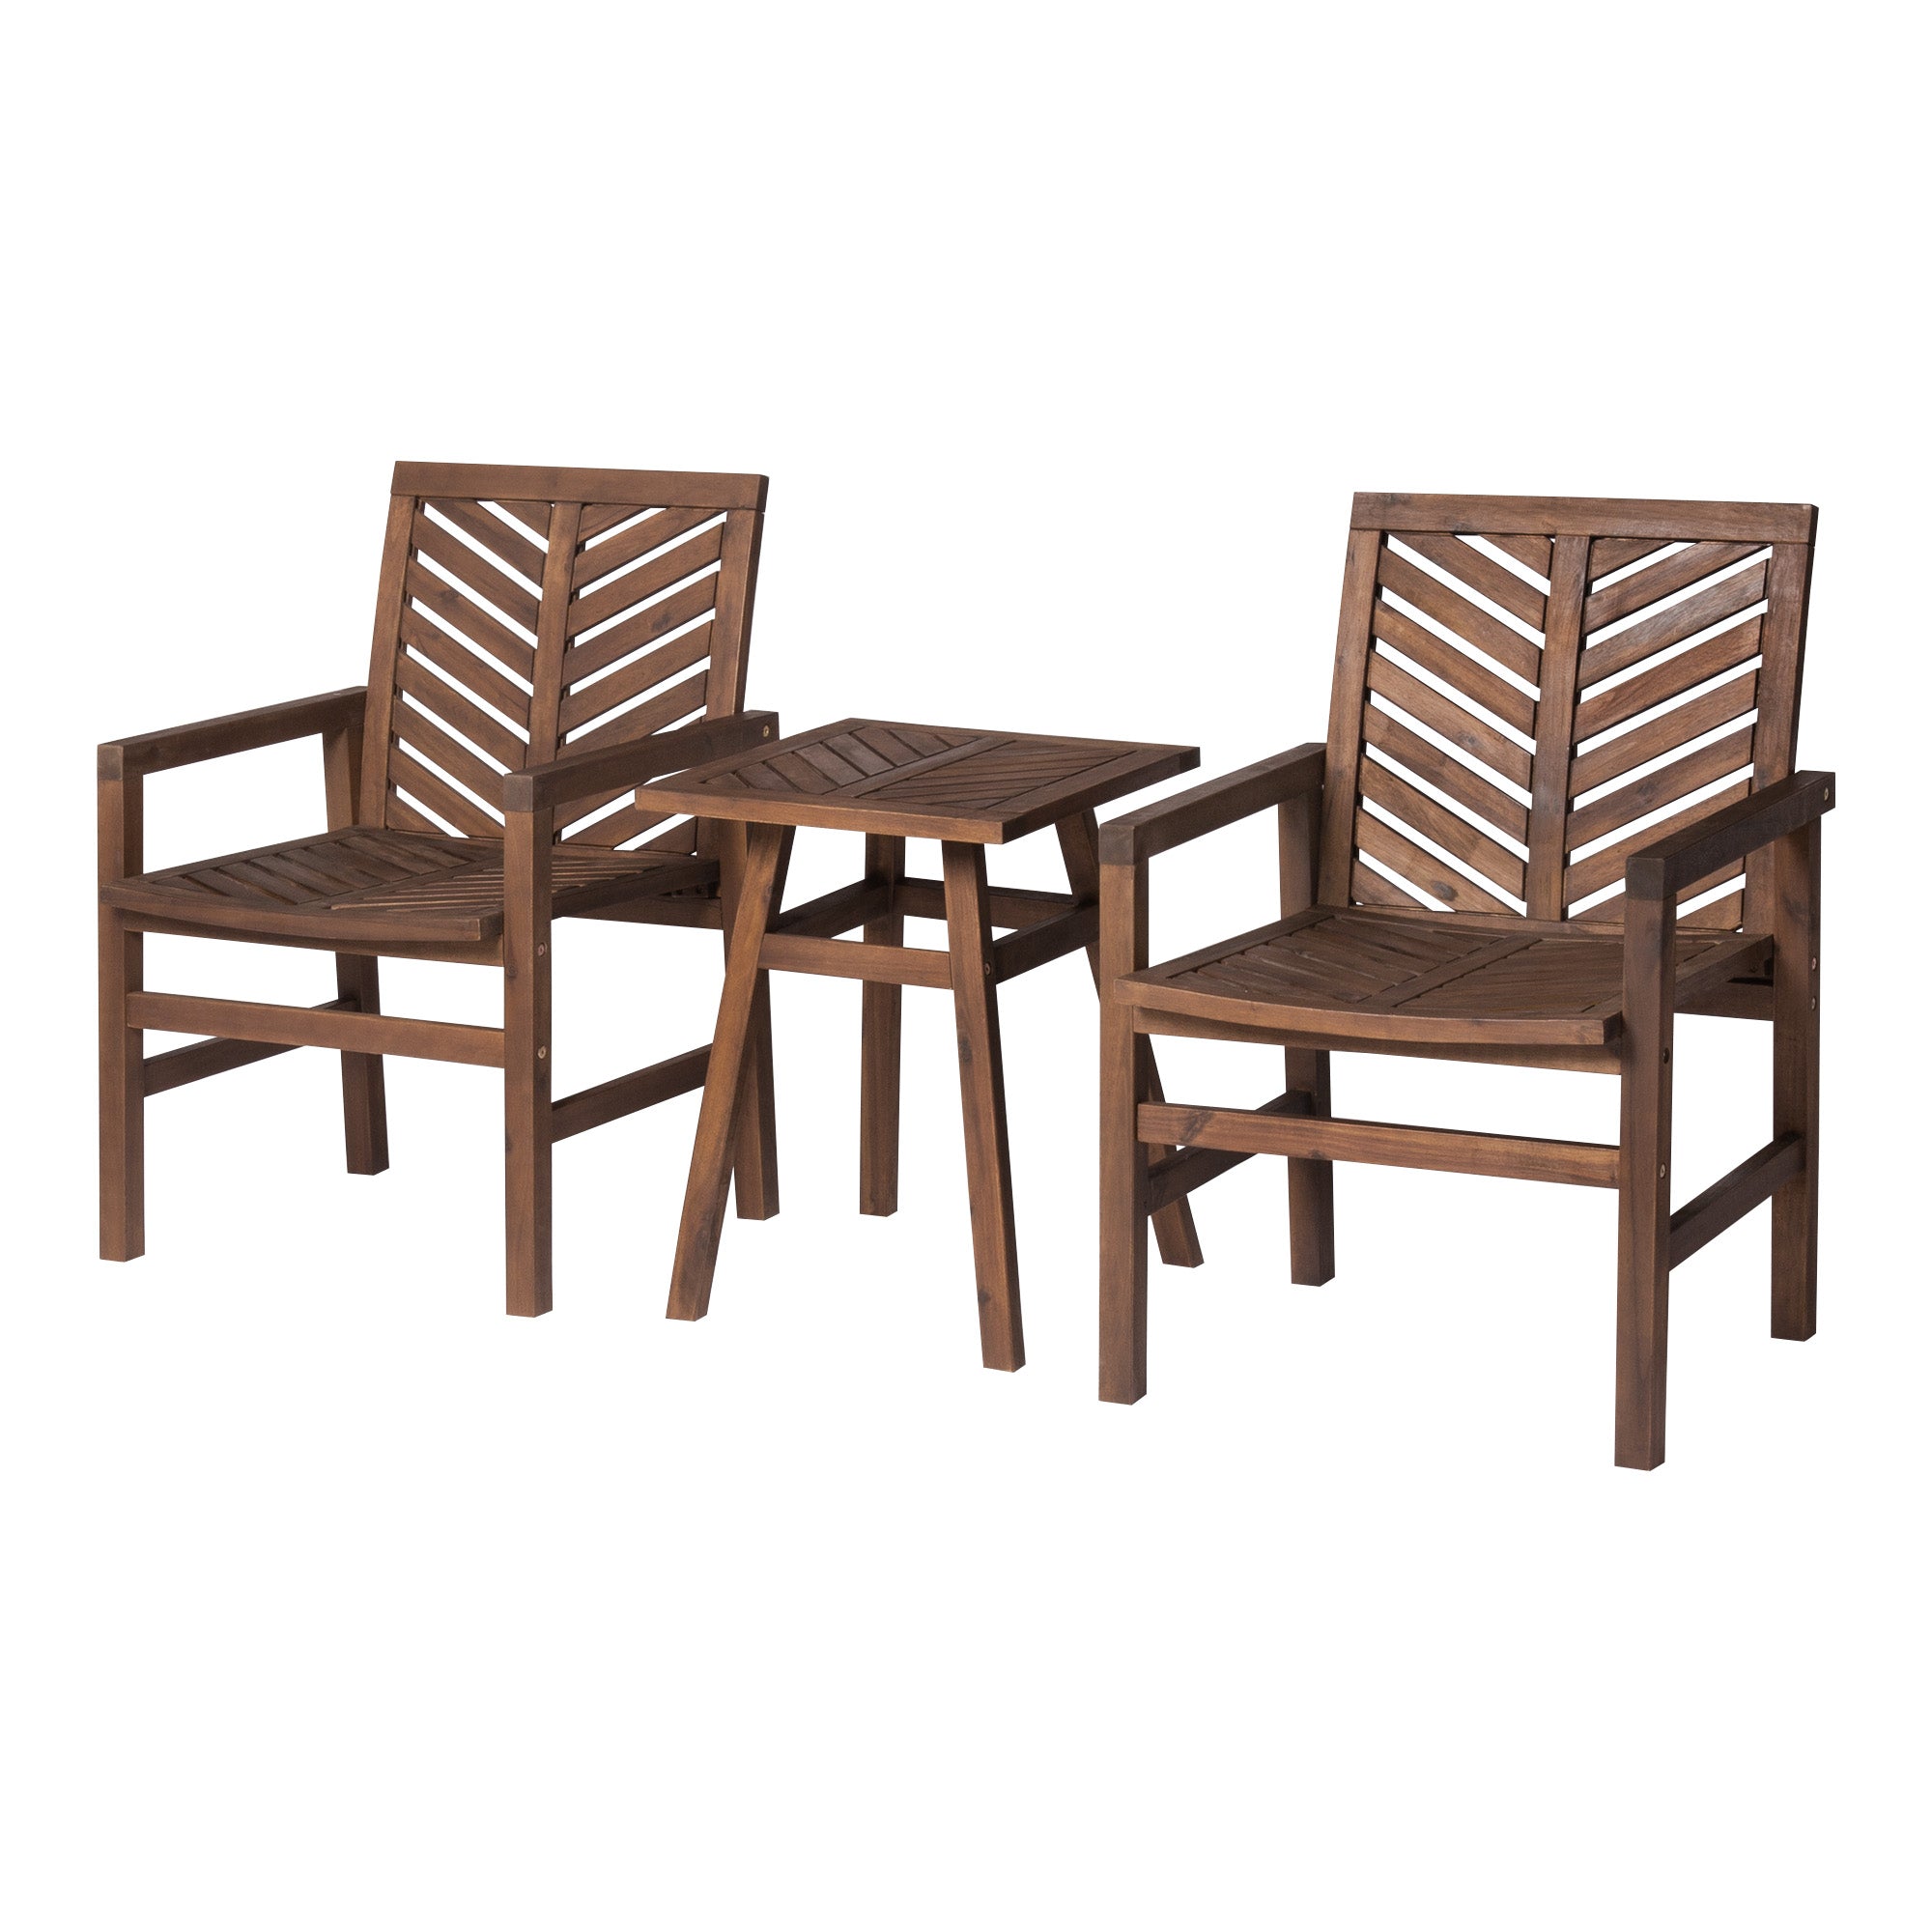 Vincent 3-Piece Chevron Outdoor Patio Chat Set - East Shore Modern Home Furnishings